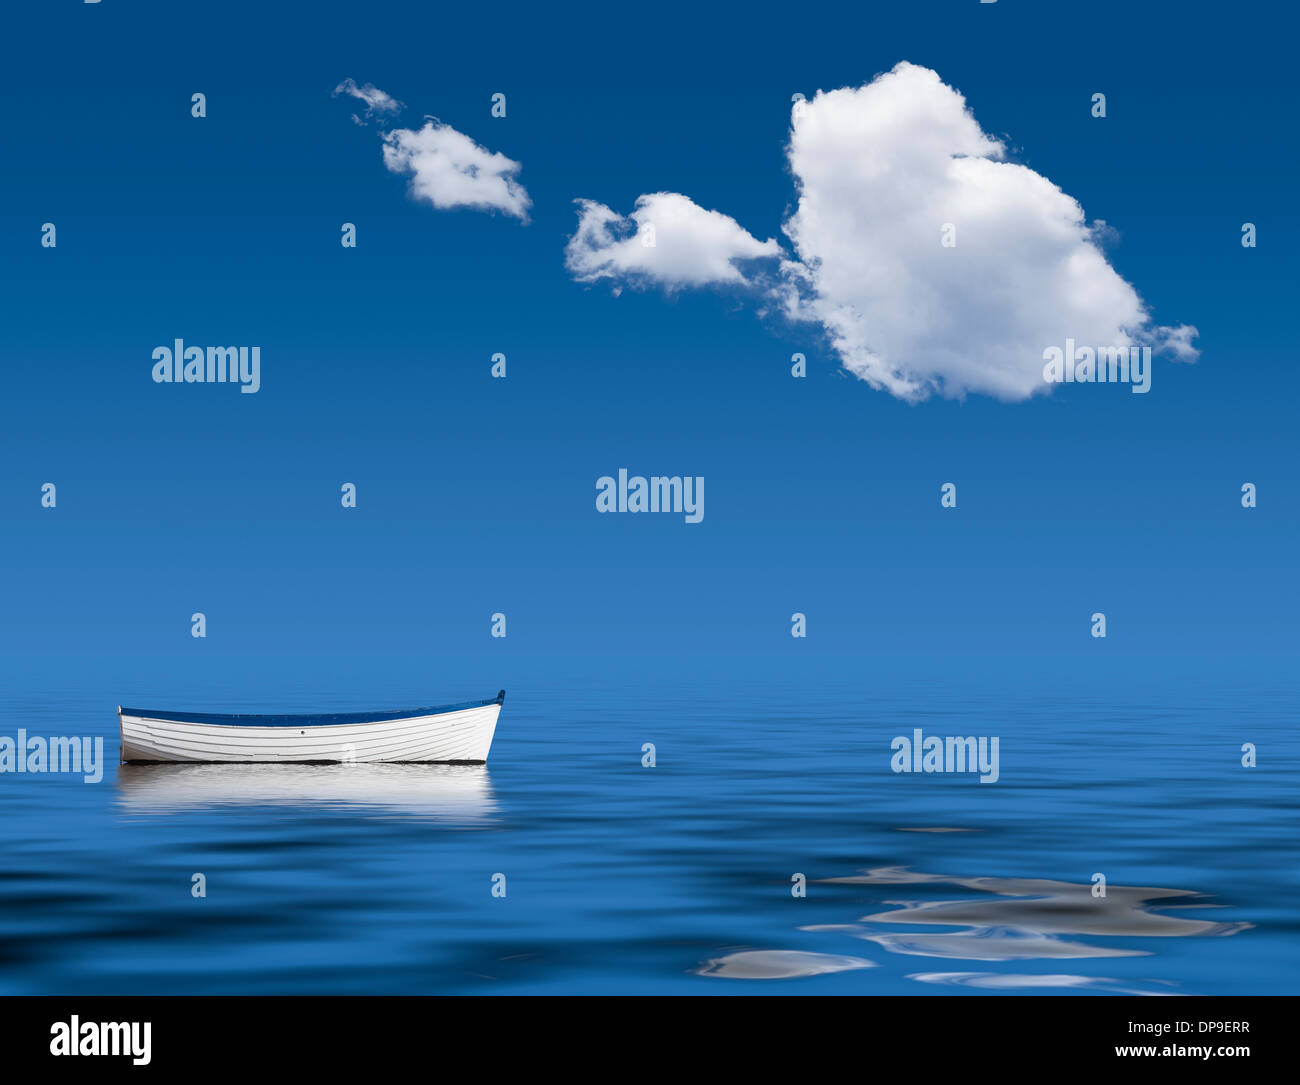 Boat alone on the ocean - peace, tranquillity, loneliness concept image Stock Photo